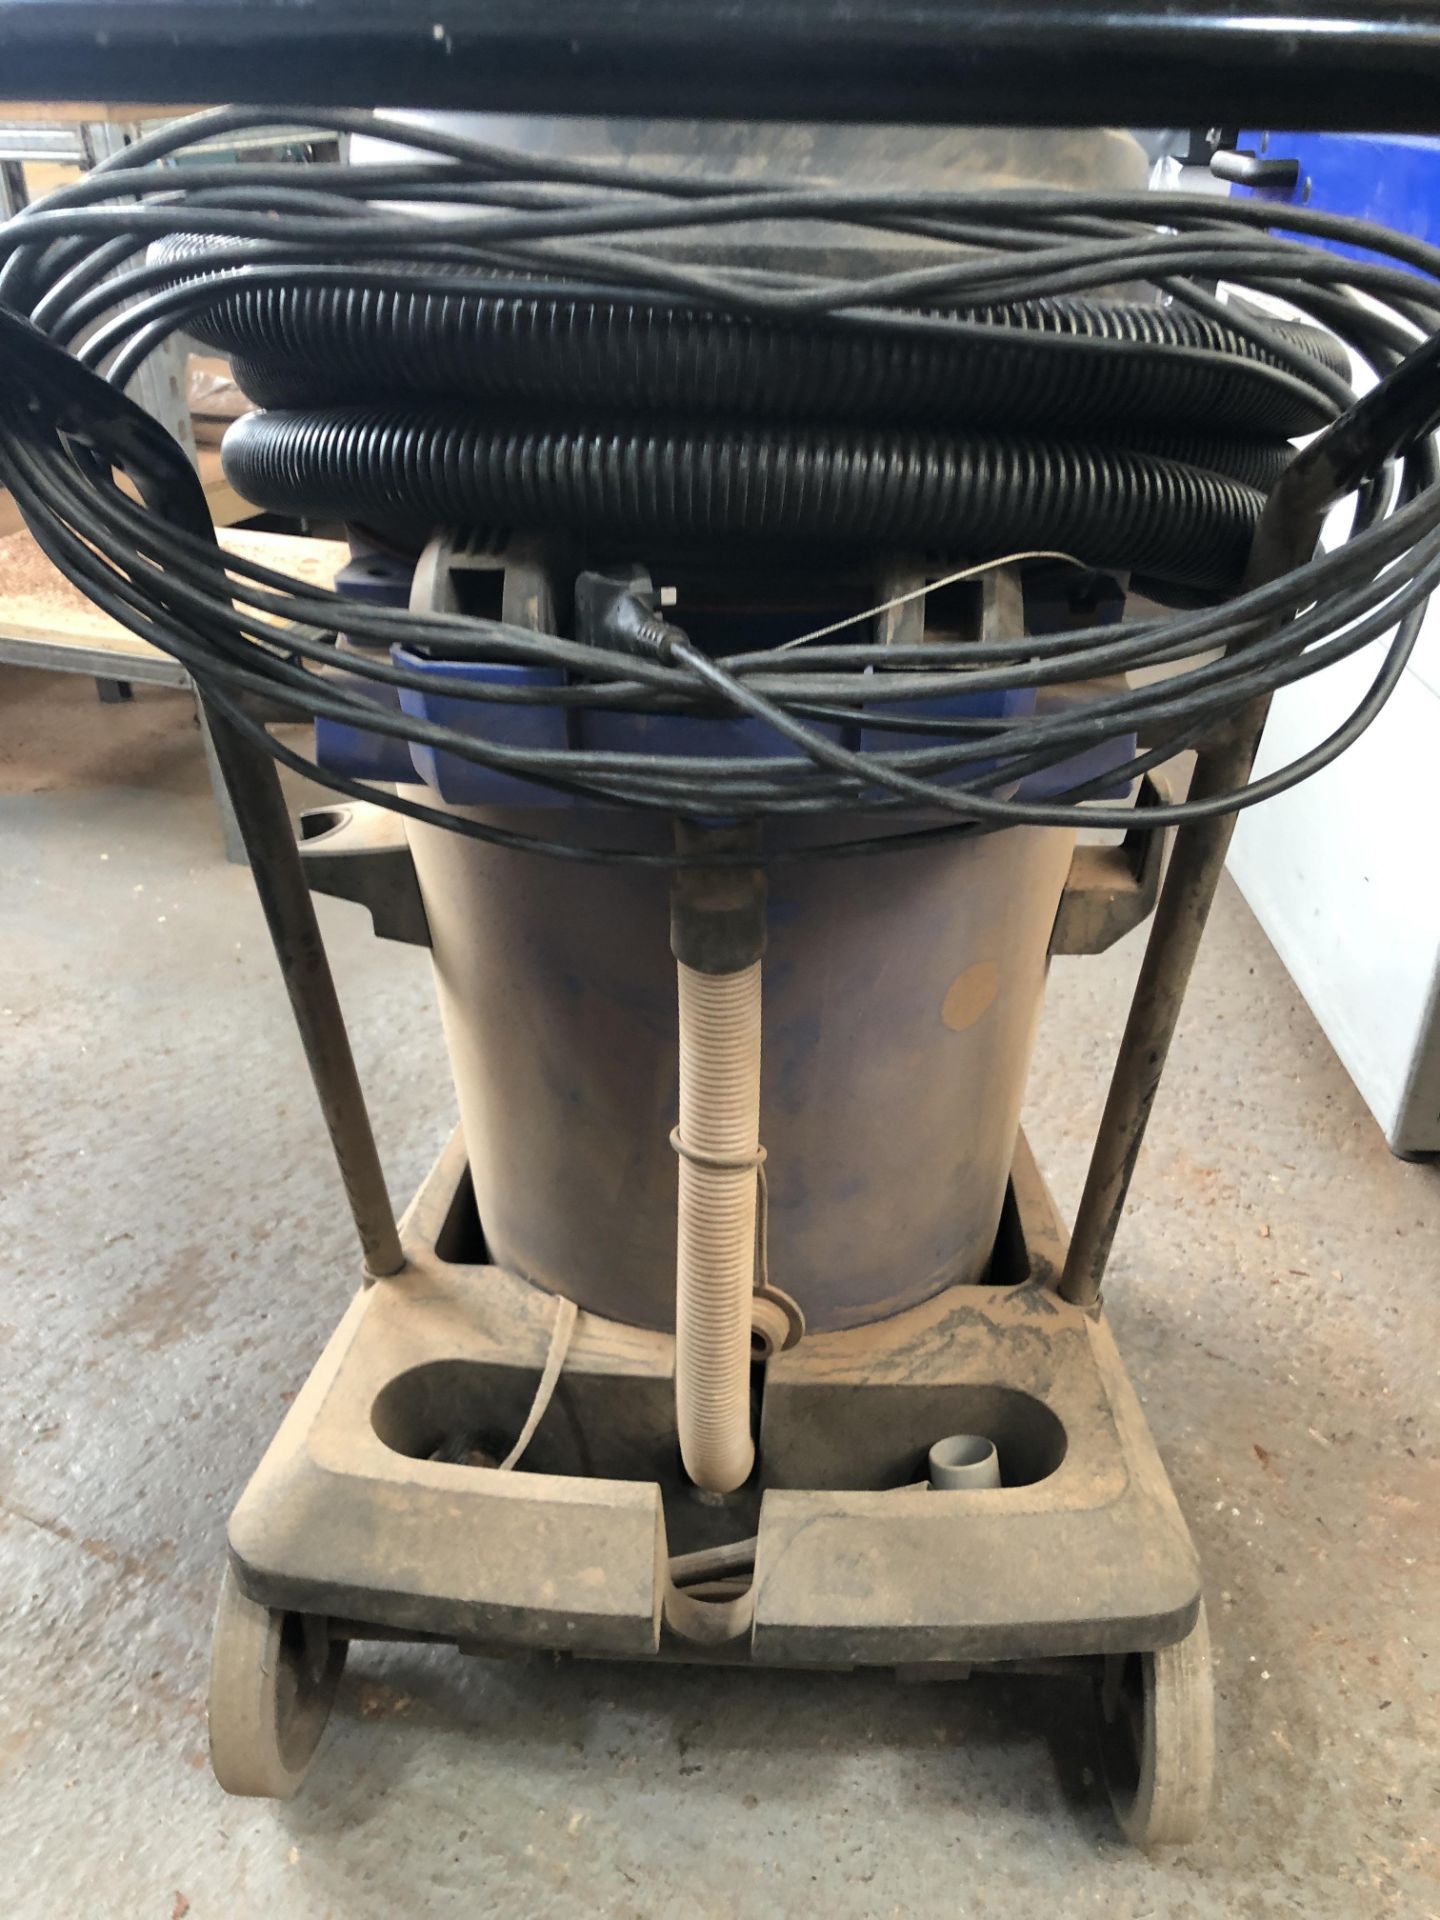 Nilfisk Alto Maxxi 1120v Commercial Vacuum Cleaner (Please note: Collection by appointment Wednesday - Image 4 of 7